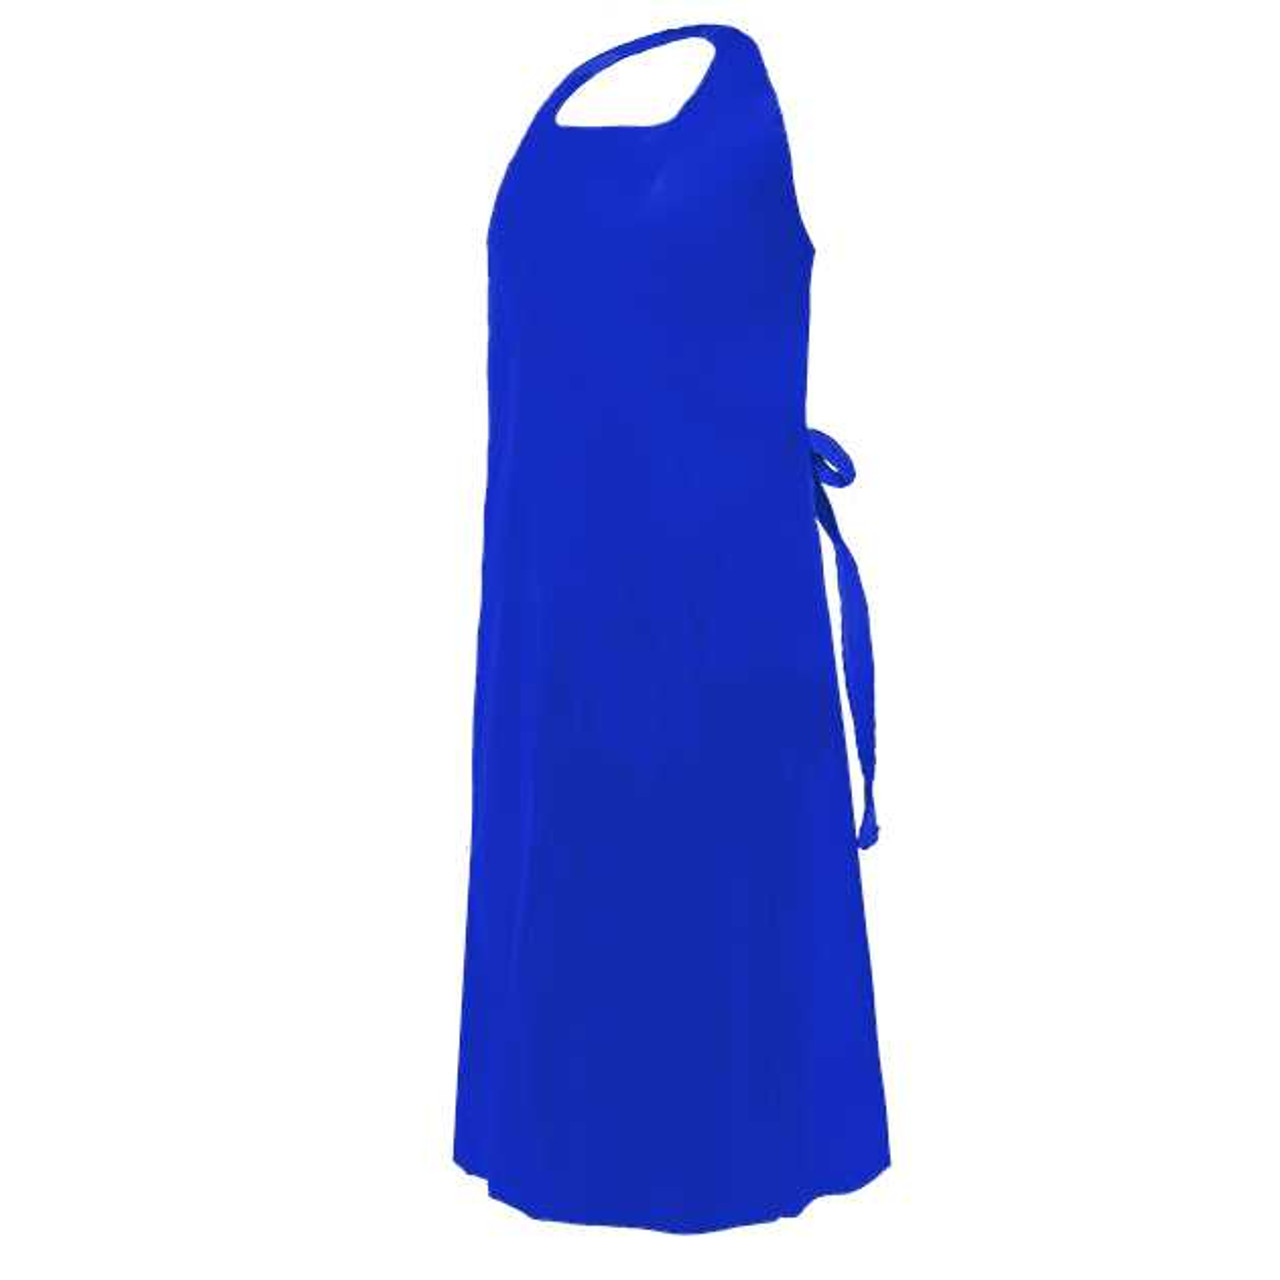 CoverMe™ Polyurethane Die Cut Apron - 5.5 mil, Available in White, Blue, or Yellow (24 aprons / case)